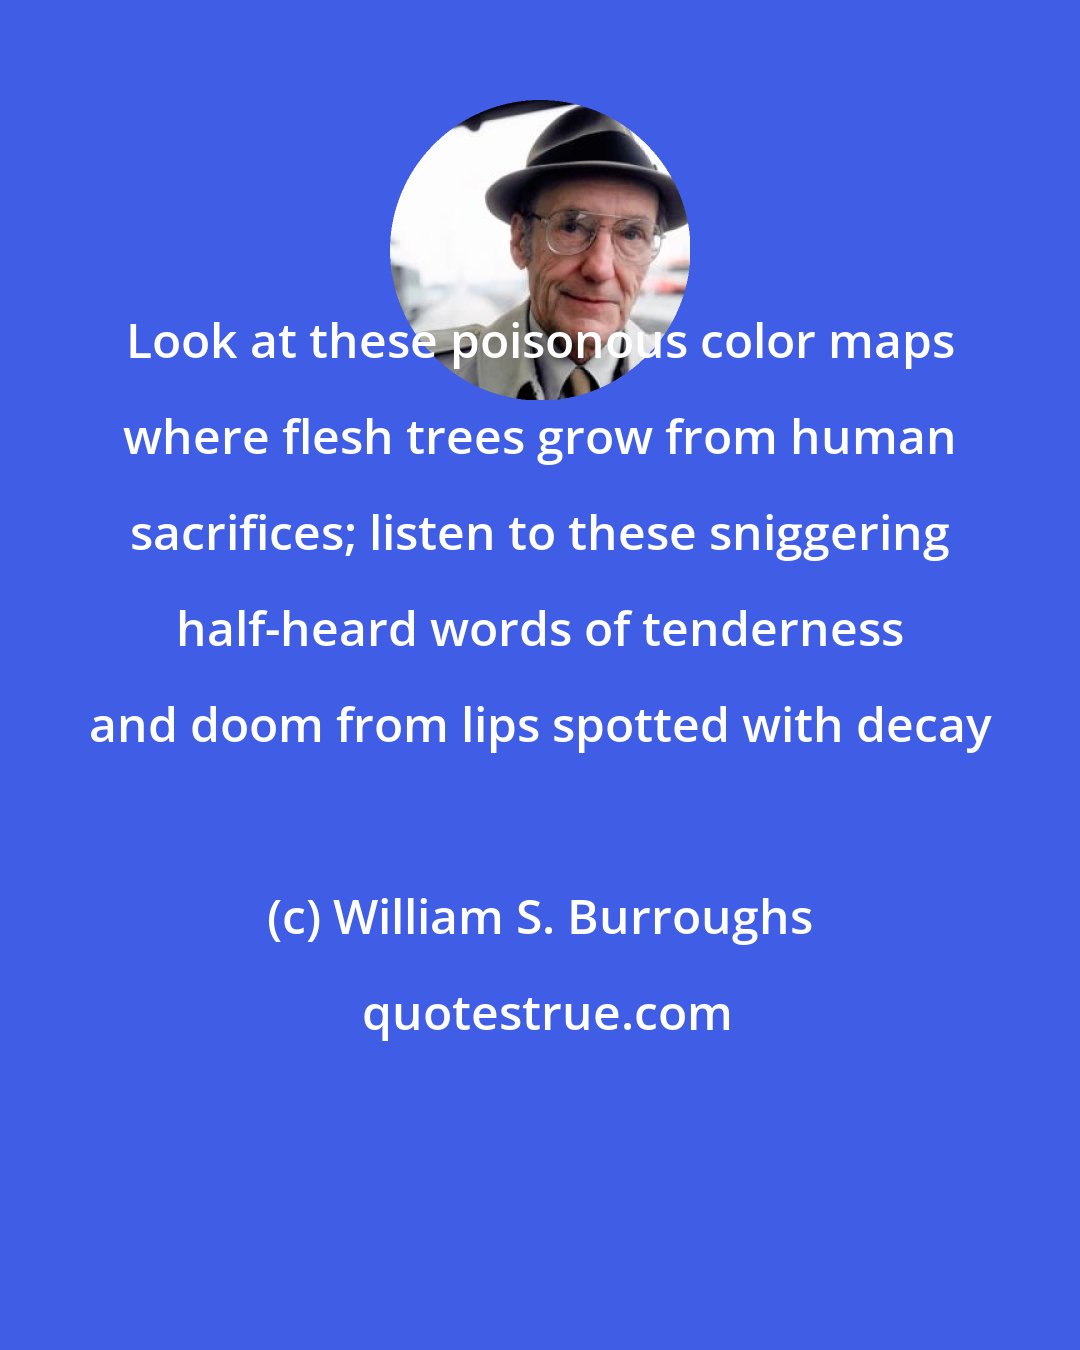 William S. Burroughs: Look at these poisonous color maps where flesh trees grow from human sacrifices; listen to these sniggering half-heard words of tenderness and doom from lips spotted with decay